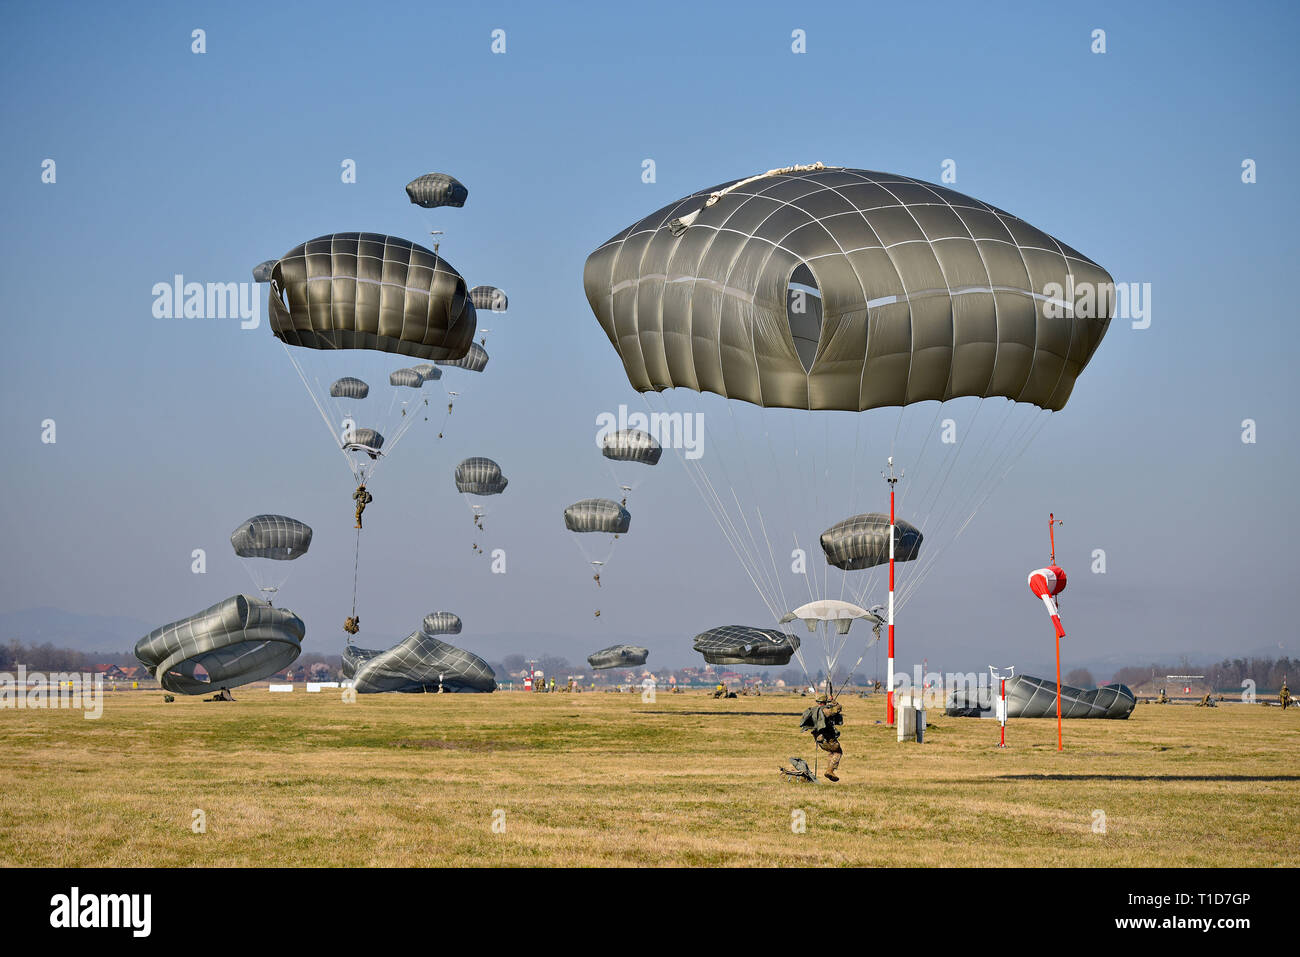 U.S. Army Paratroopers assigned to 1st Battalion, 503rd Infantry Regiment, 173rd Airborne Brigade, descend onto Cerklje Drop Zone in Slovenia, Mar. 22, 2019 after exiting from C17 Globemaster III Aircraft from Papa Air Base, Hungary, during an airborne operation as part of exercise Eagle Sokol. Exercise Eagle Sokol is a bilateral training exercise with the Slovenian Armed Forces focused on the rapid deployment and assembly of forces and team cohesion with weapon systems tactics and procedures. Exercises such as this build a foundation of teamwork and readiness between allied NATO countries. Th Stock Photo